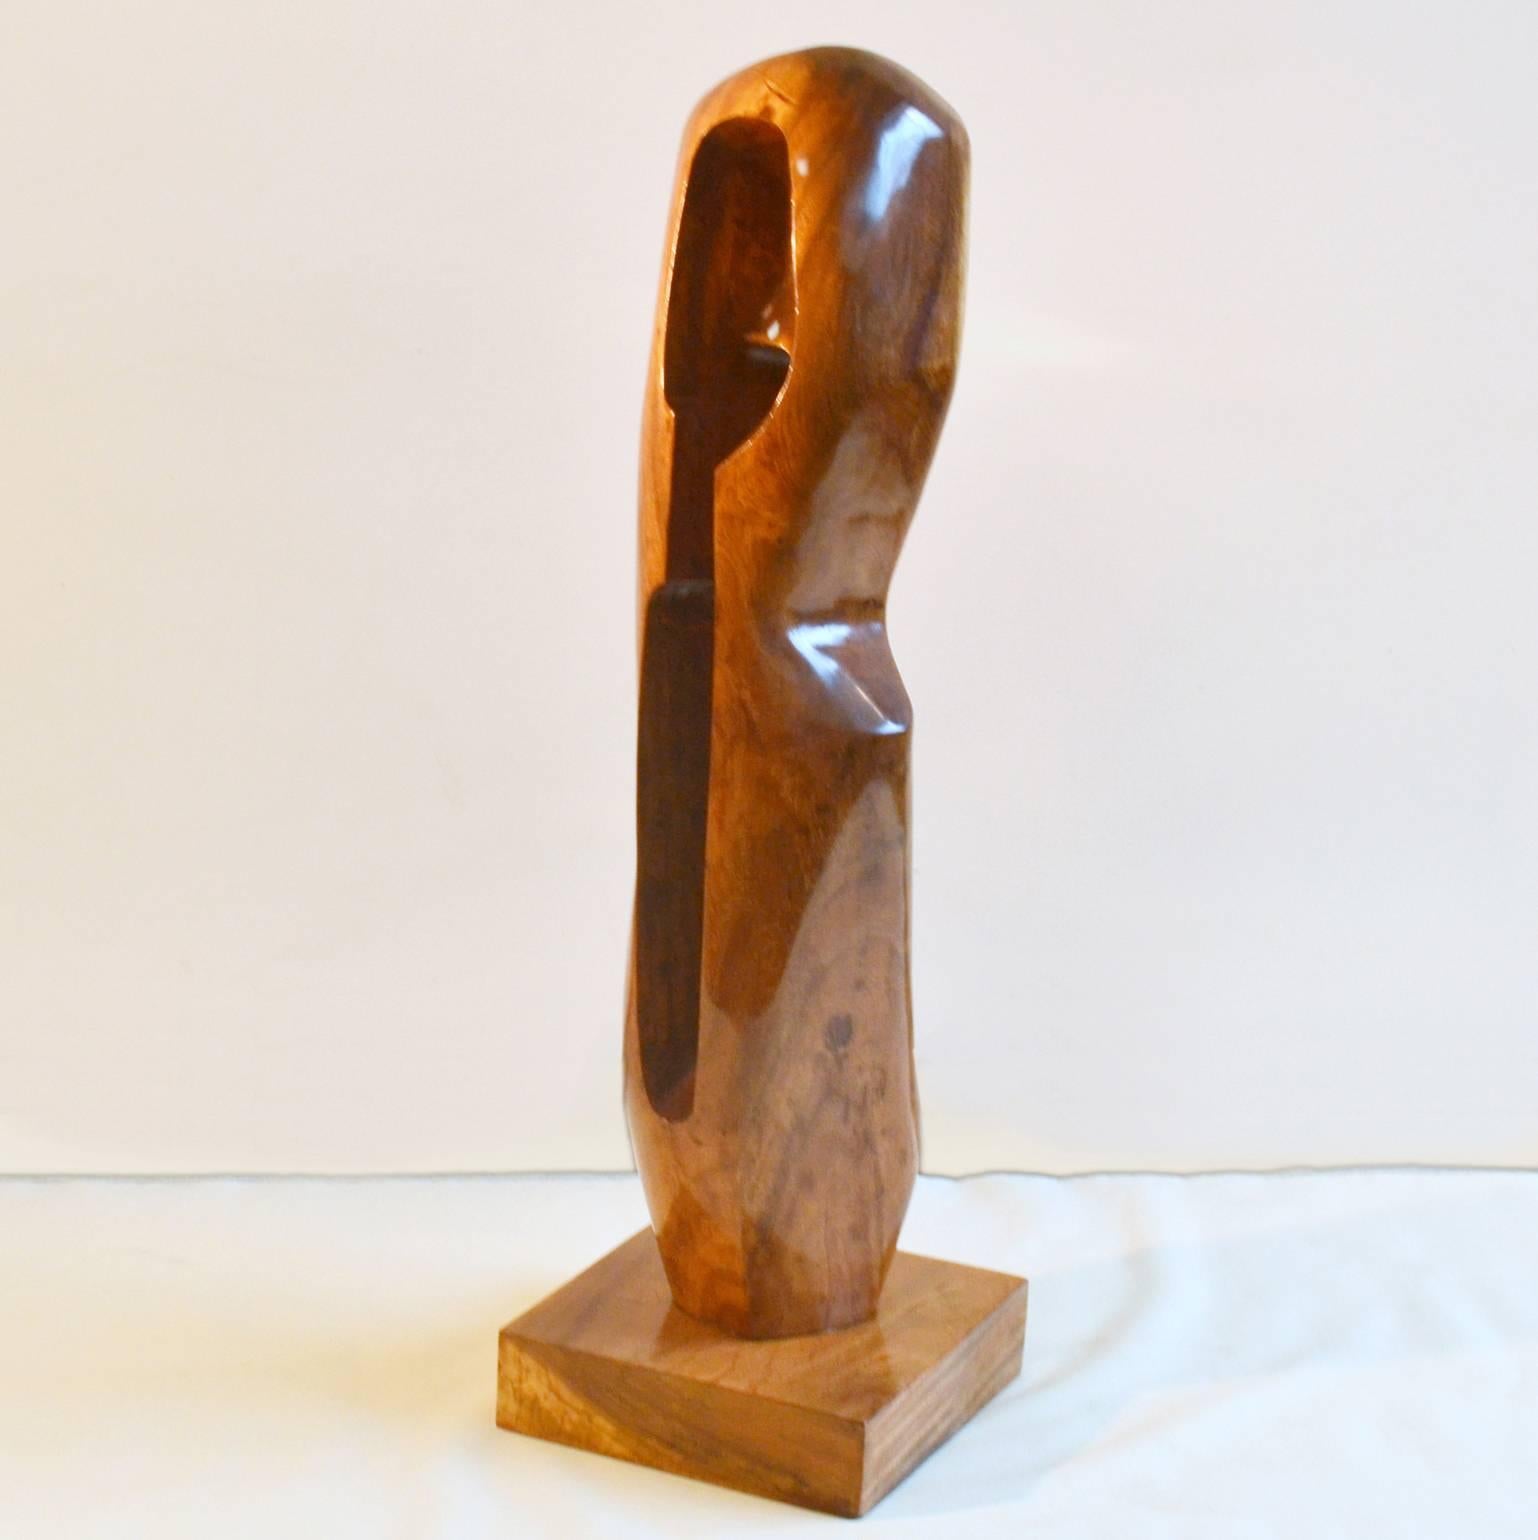 Large Mahogany wooden sculpture in curvaceous abstract form by unknown artist in the style of Alexander Knoll.
The sculpture is placed on a mahogany base. It was originally stained. 
We had it stripped and polished to enjoy its wood grain and